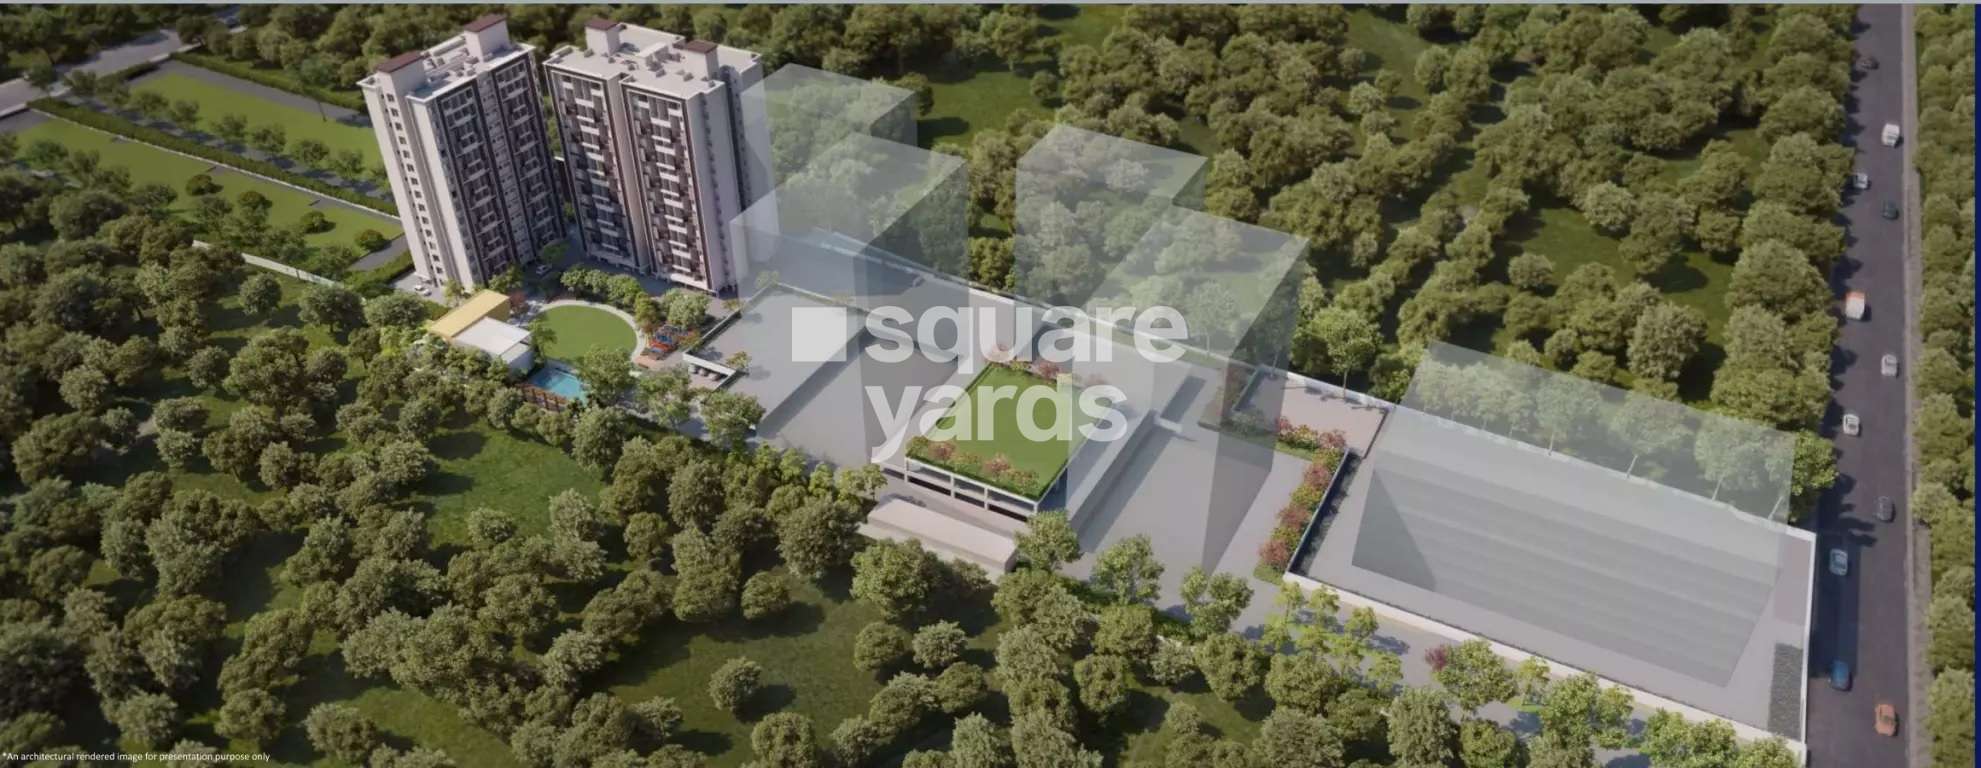 jhamtani vision ace phase ii tower view7